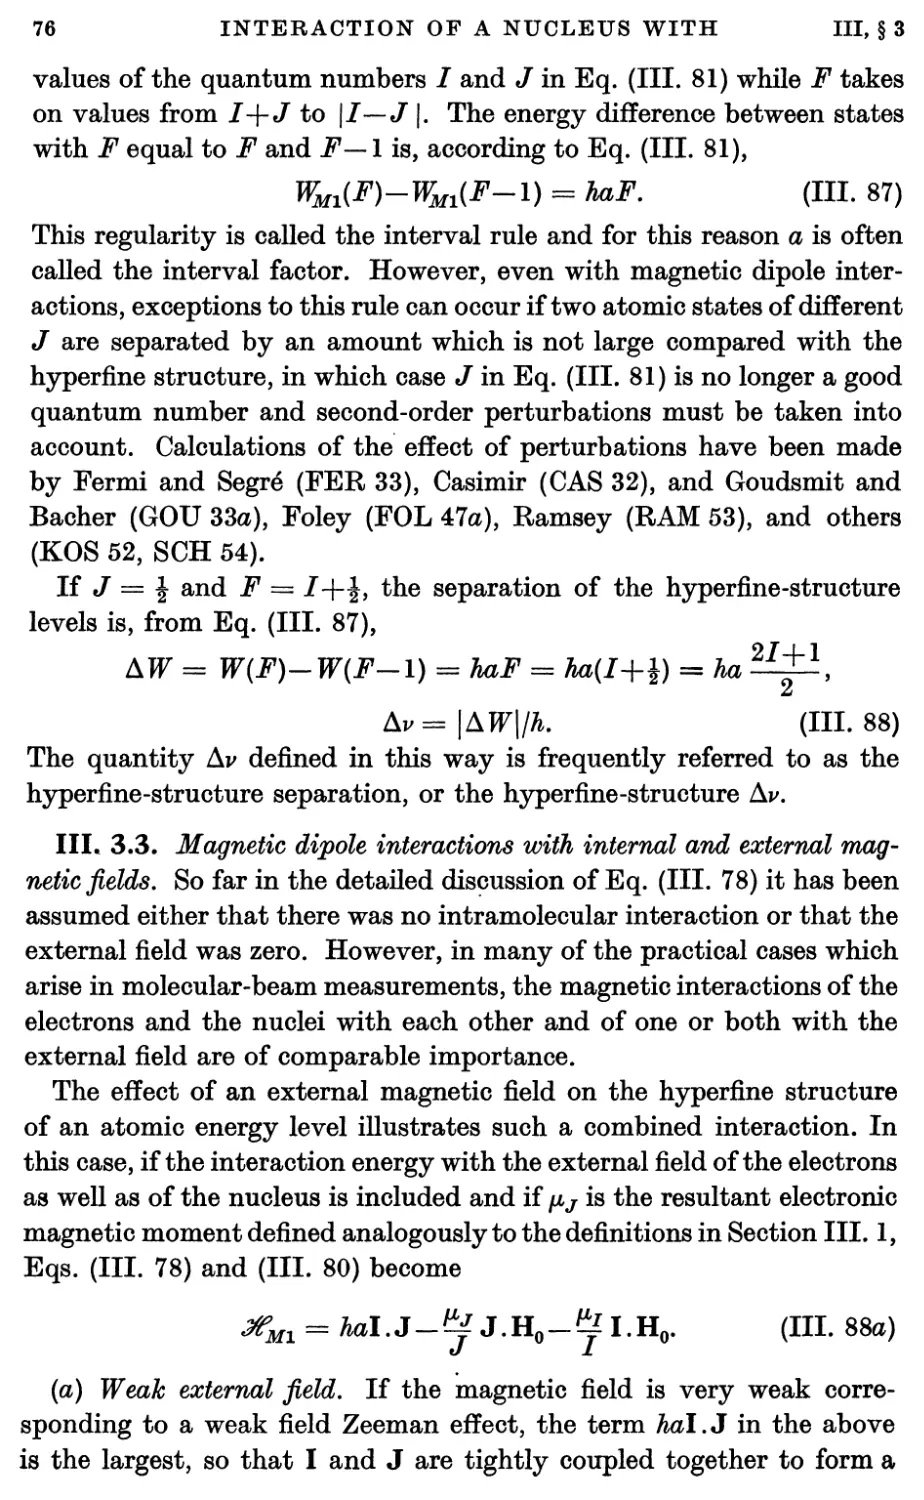 III.3.3. Magnetic dipole interactions with internal and external magnetic fields